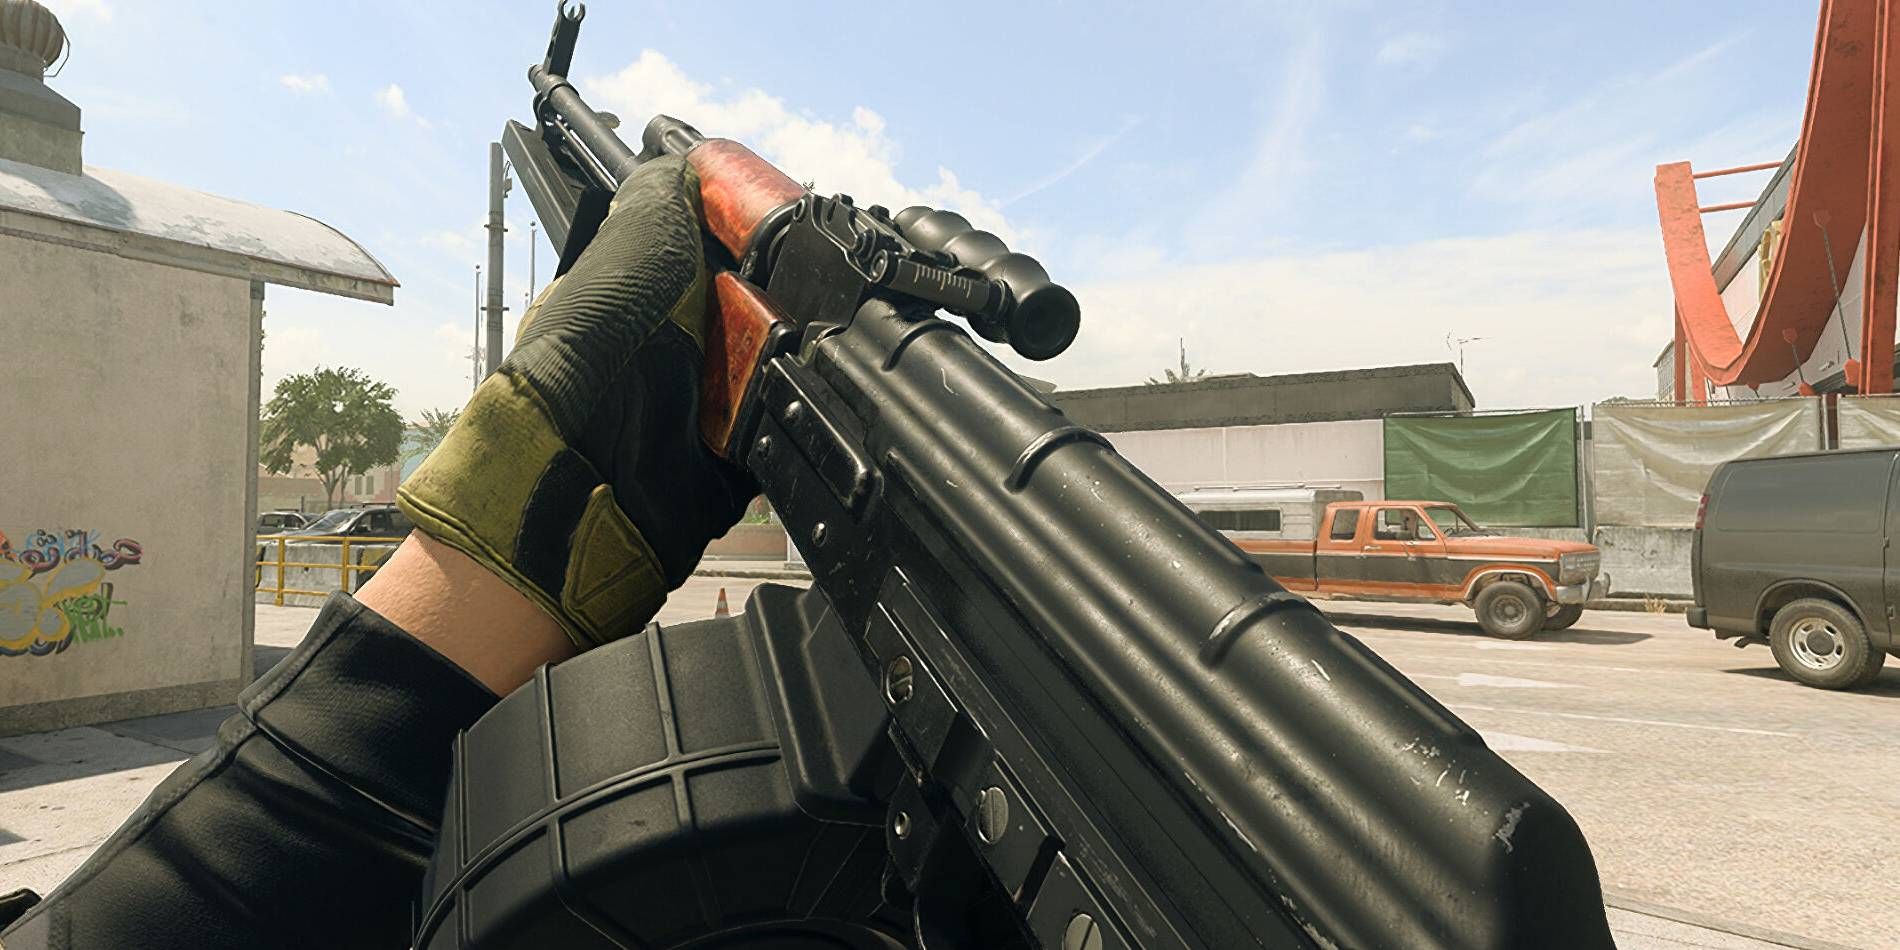 Call of Duty Warzone 2.0 RPK LMG Weapon Being Held in Players Hands Through Perspective Screenshot